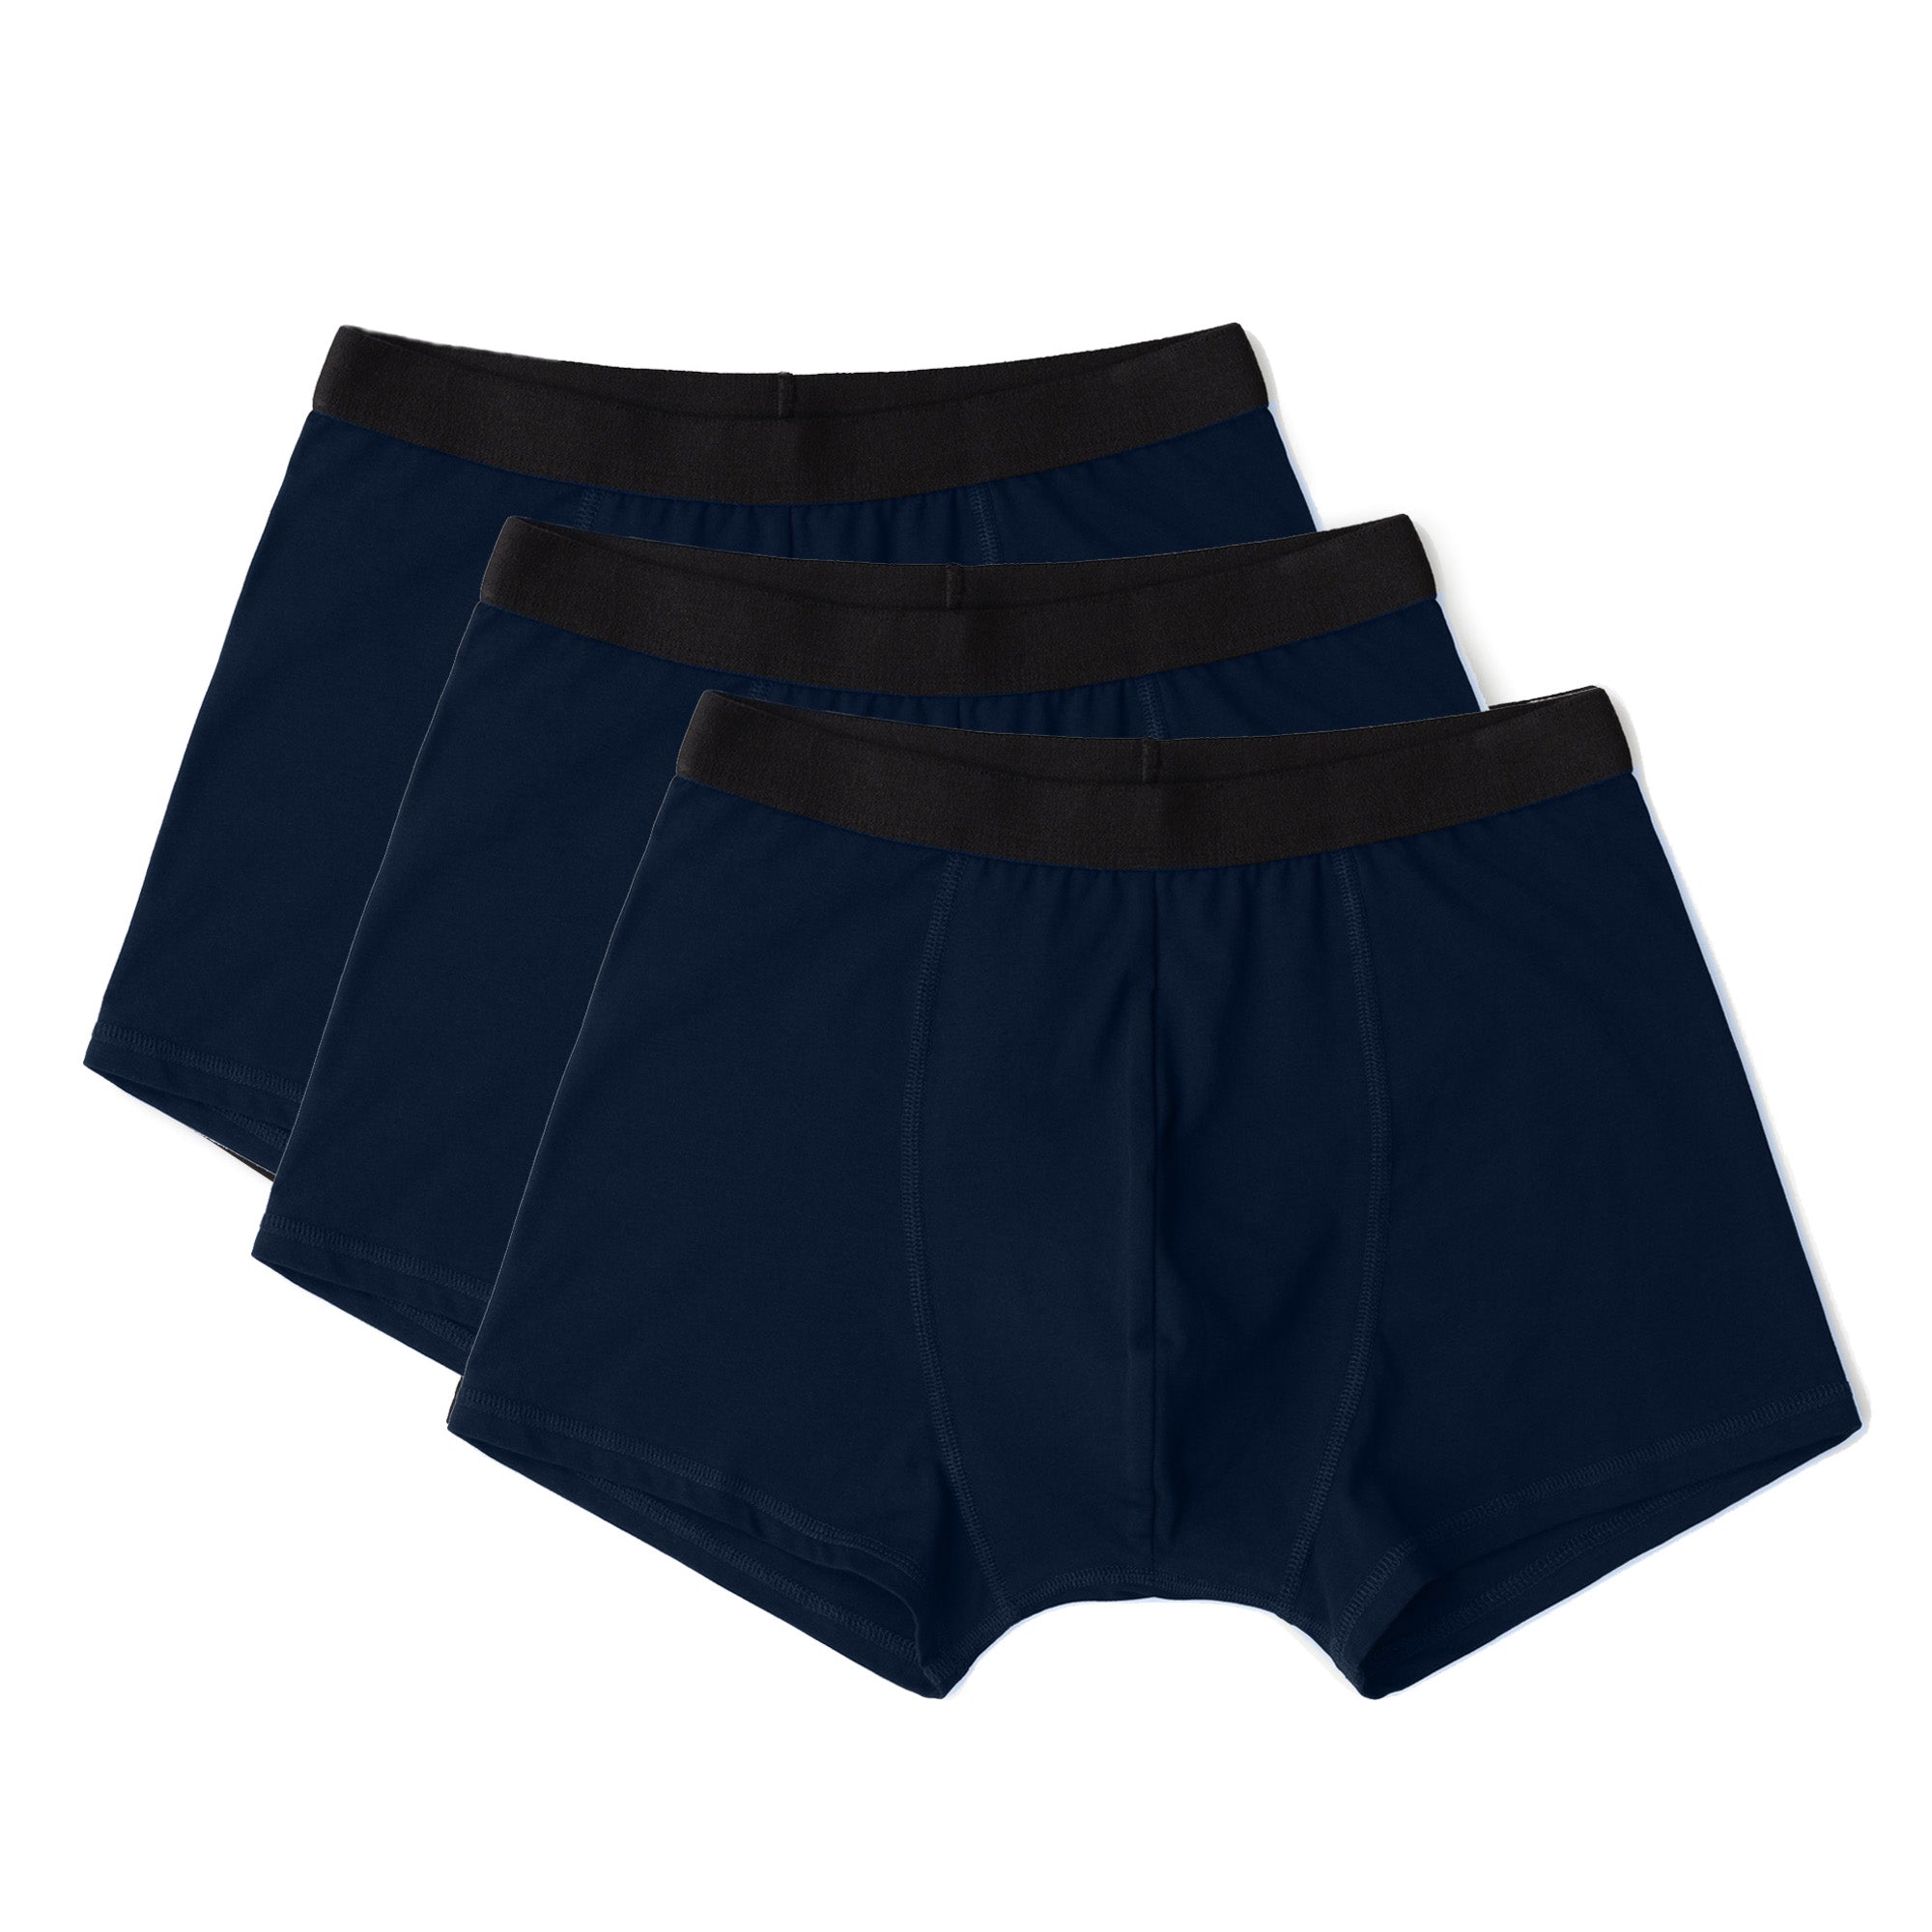 Navy Organic & Recycled cotton Boxer Briefs 3 pack